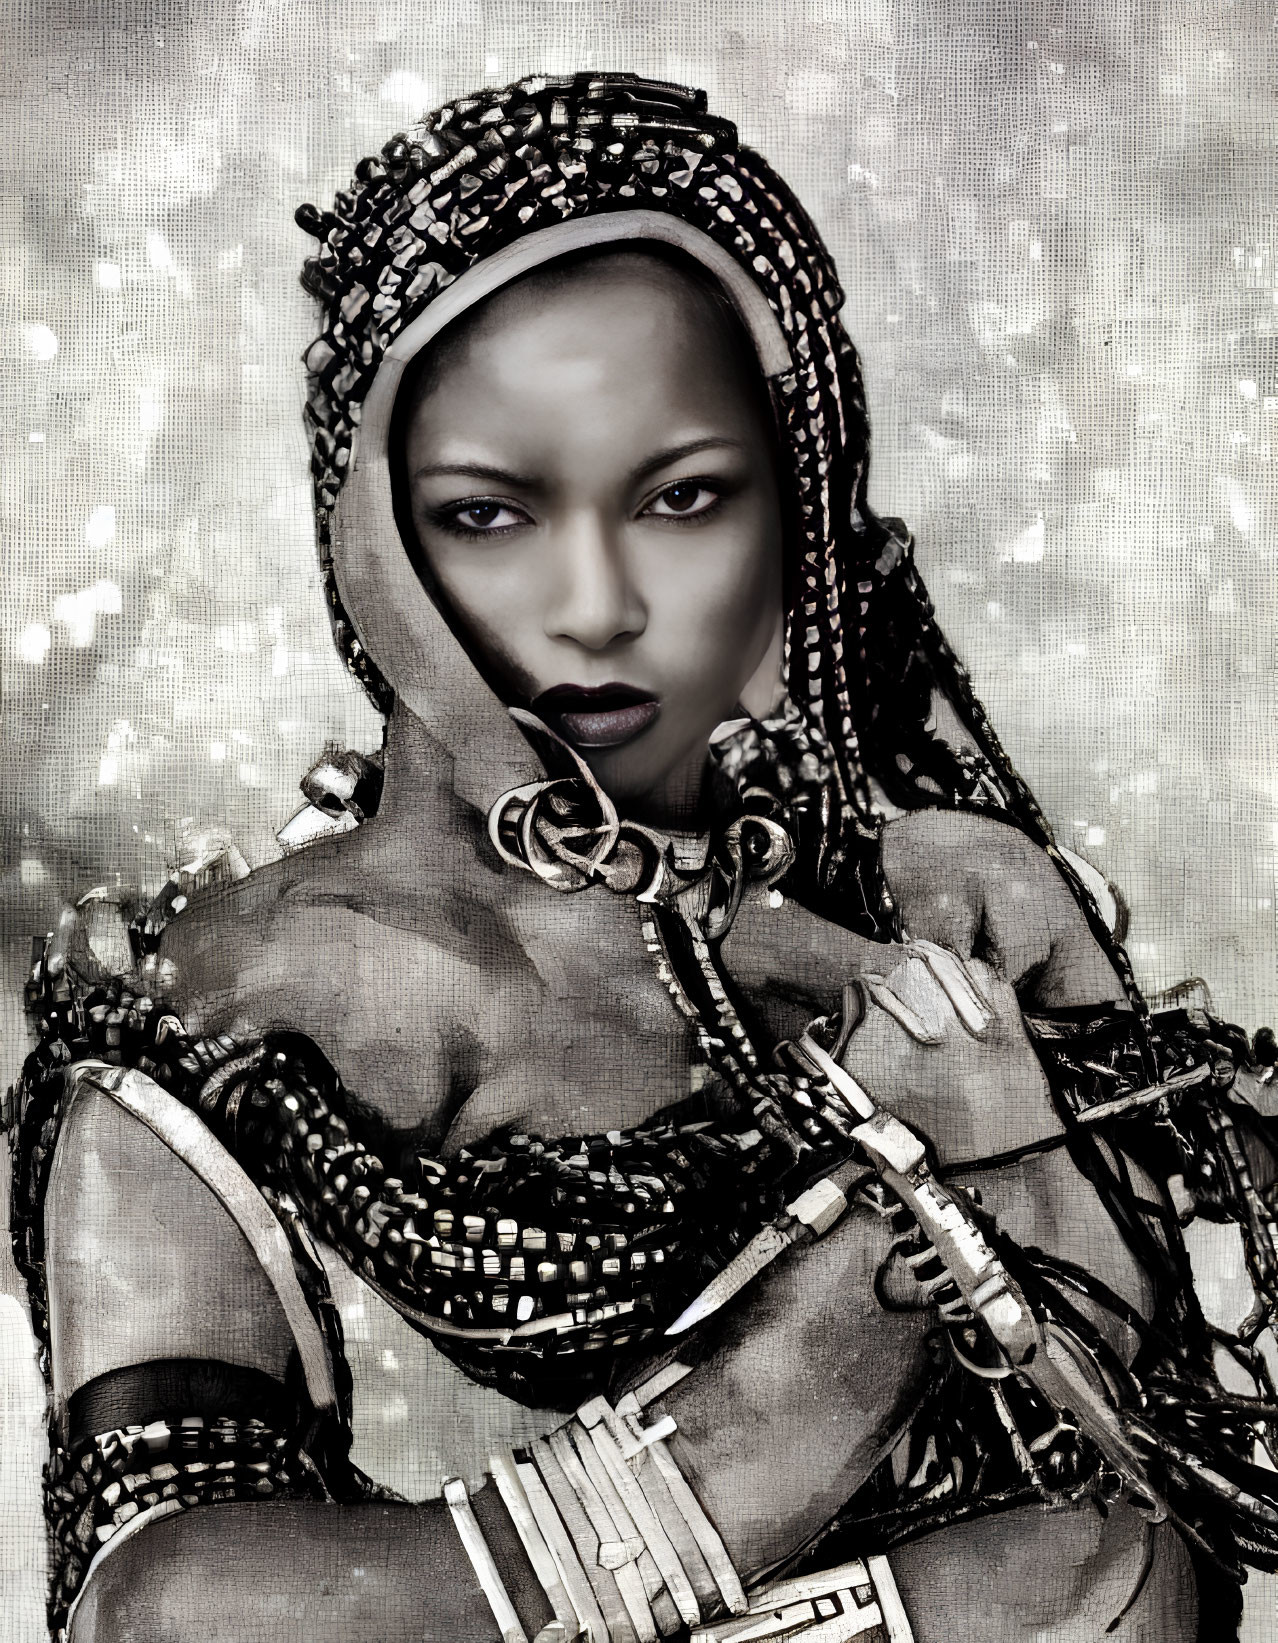 Monochrome portrait of woman in tribal-inspired attire on speckled backdrop